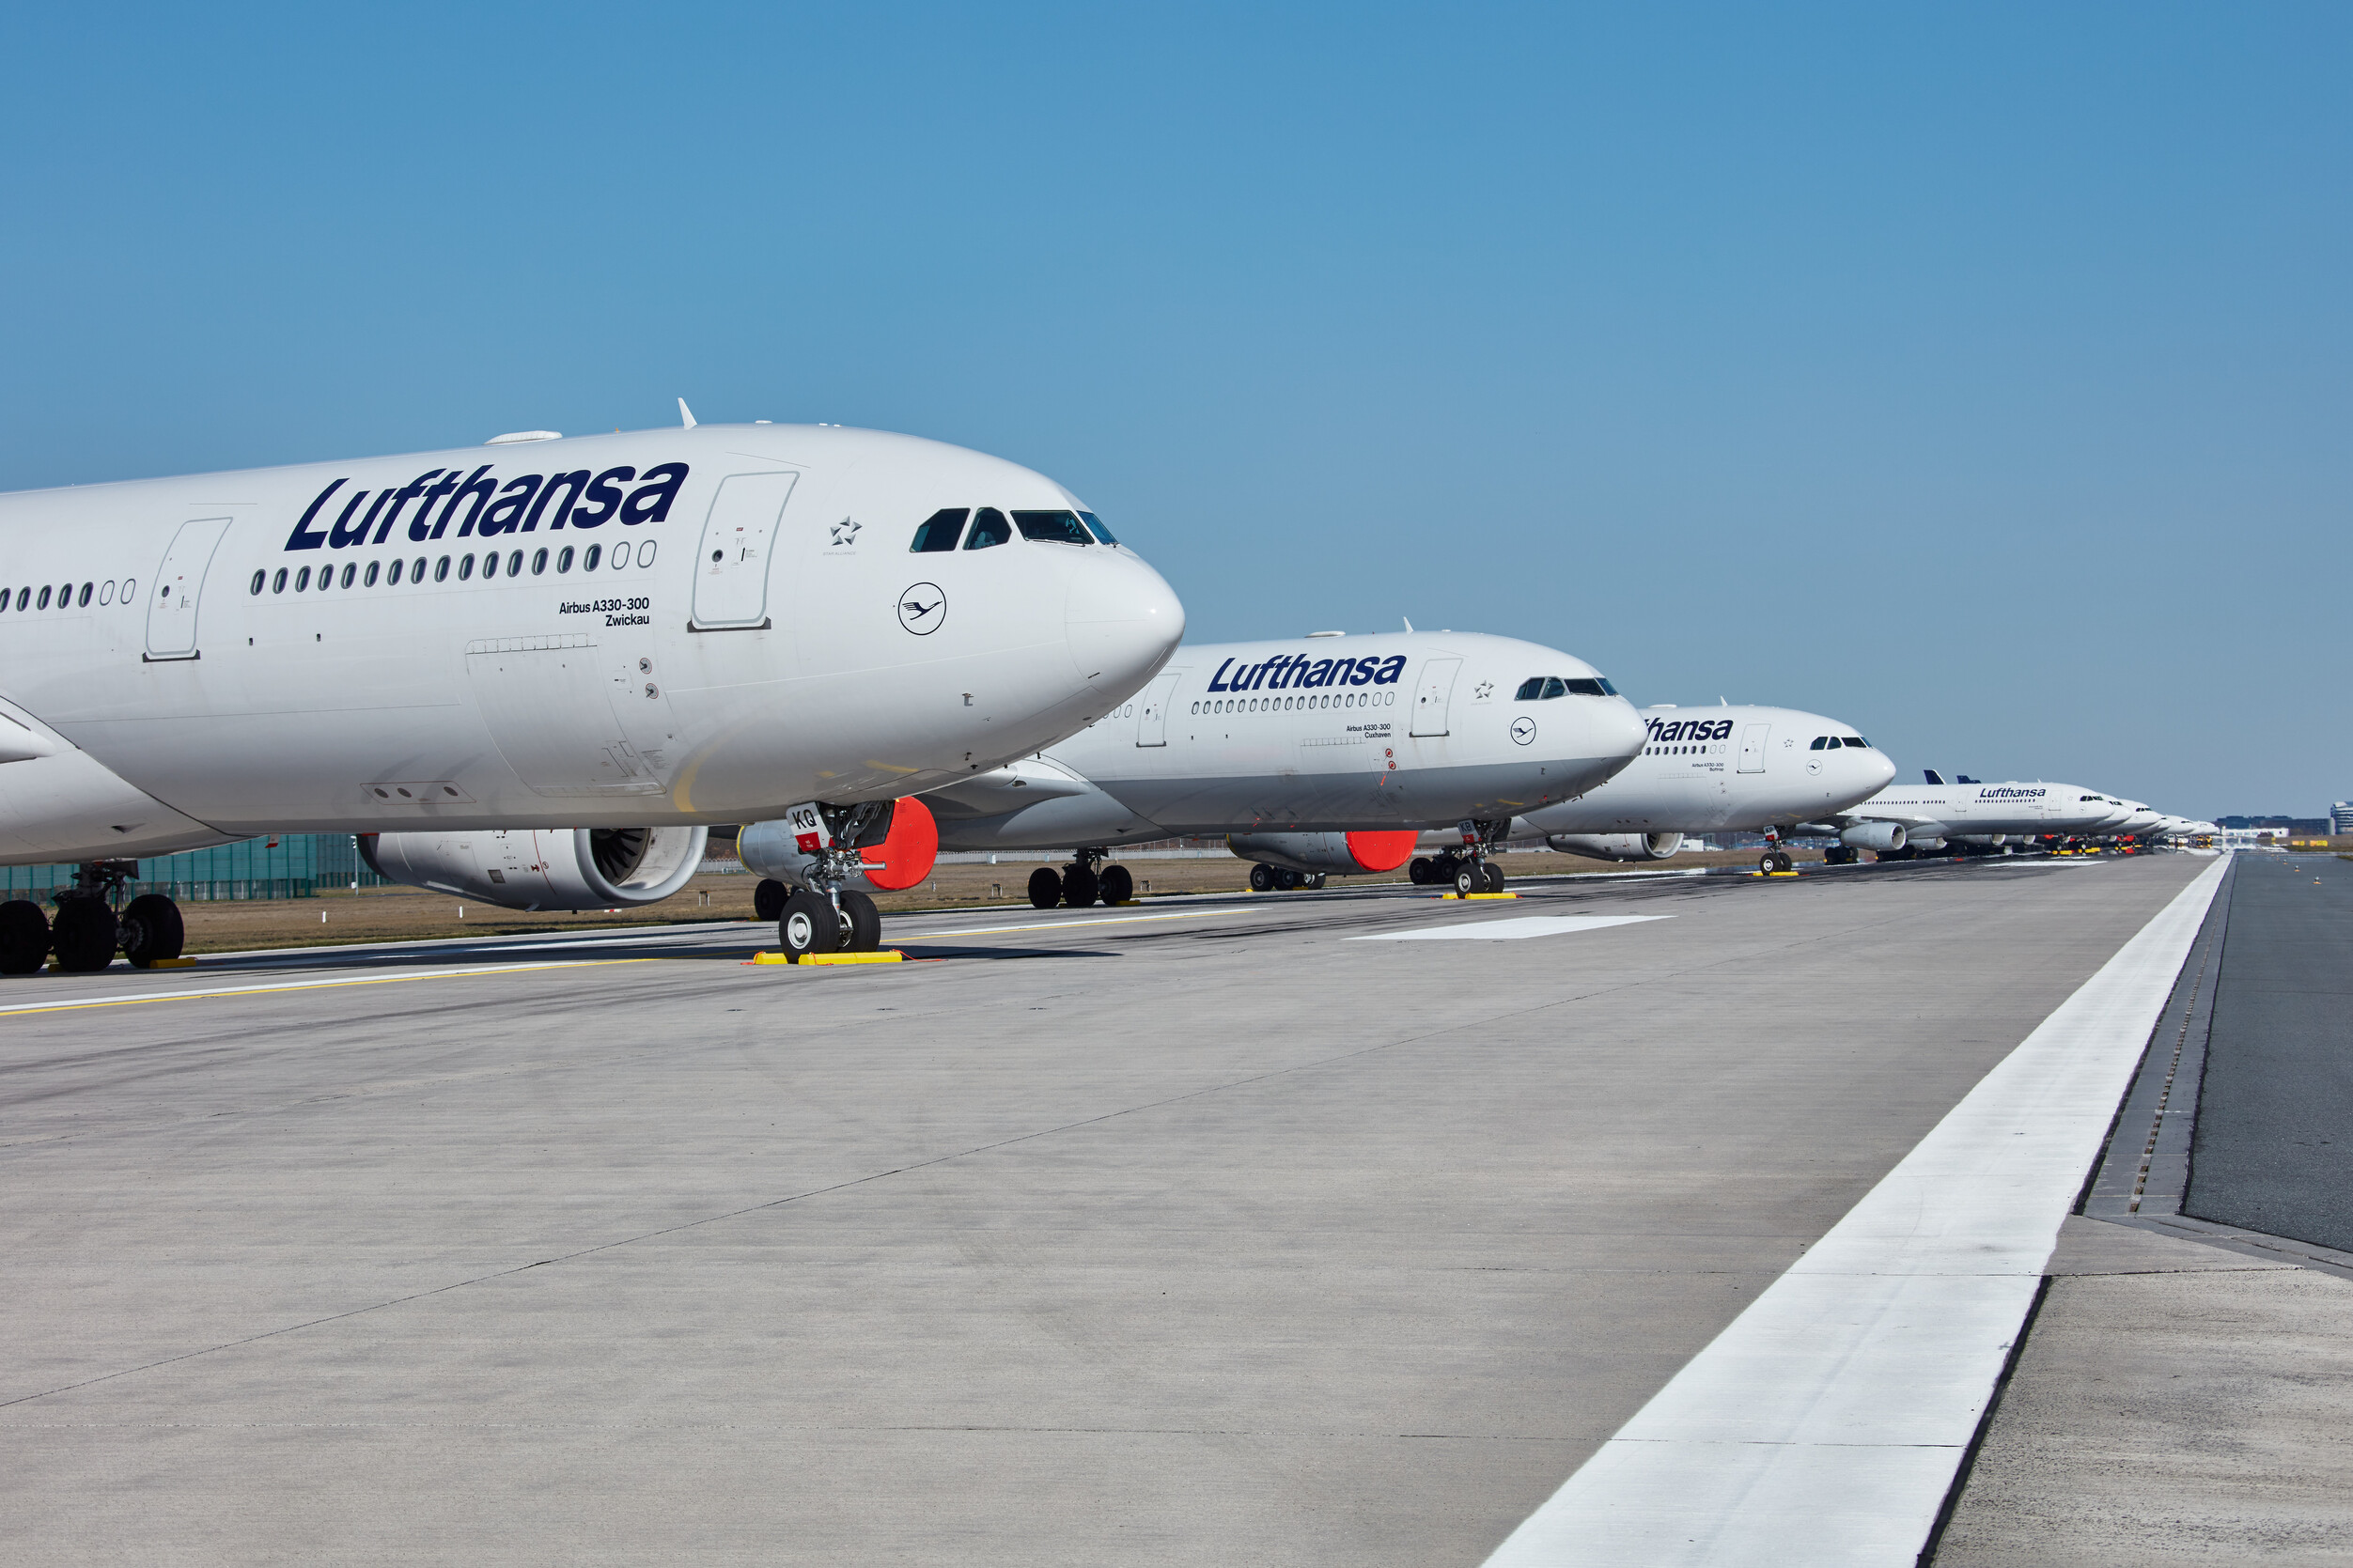 Lufthansa to take seats out of A330 passenger aircraft for cargo operations